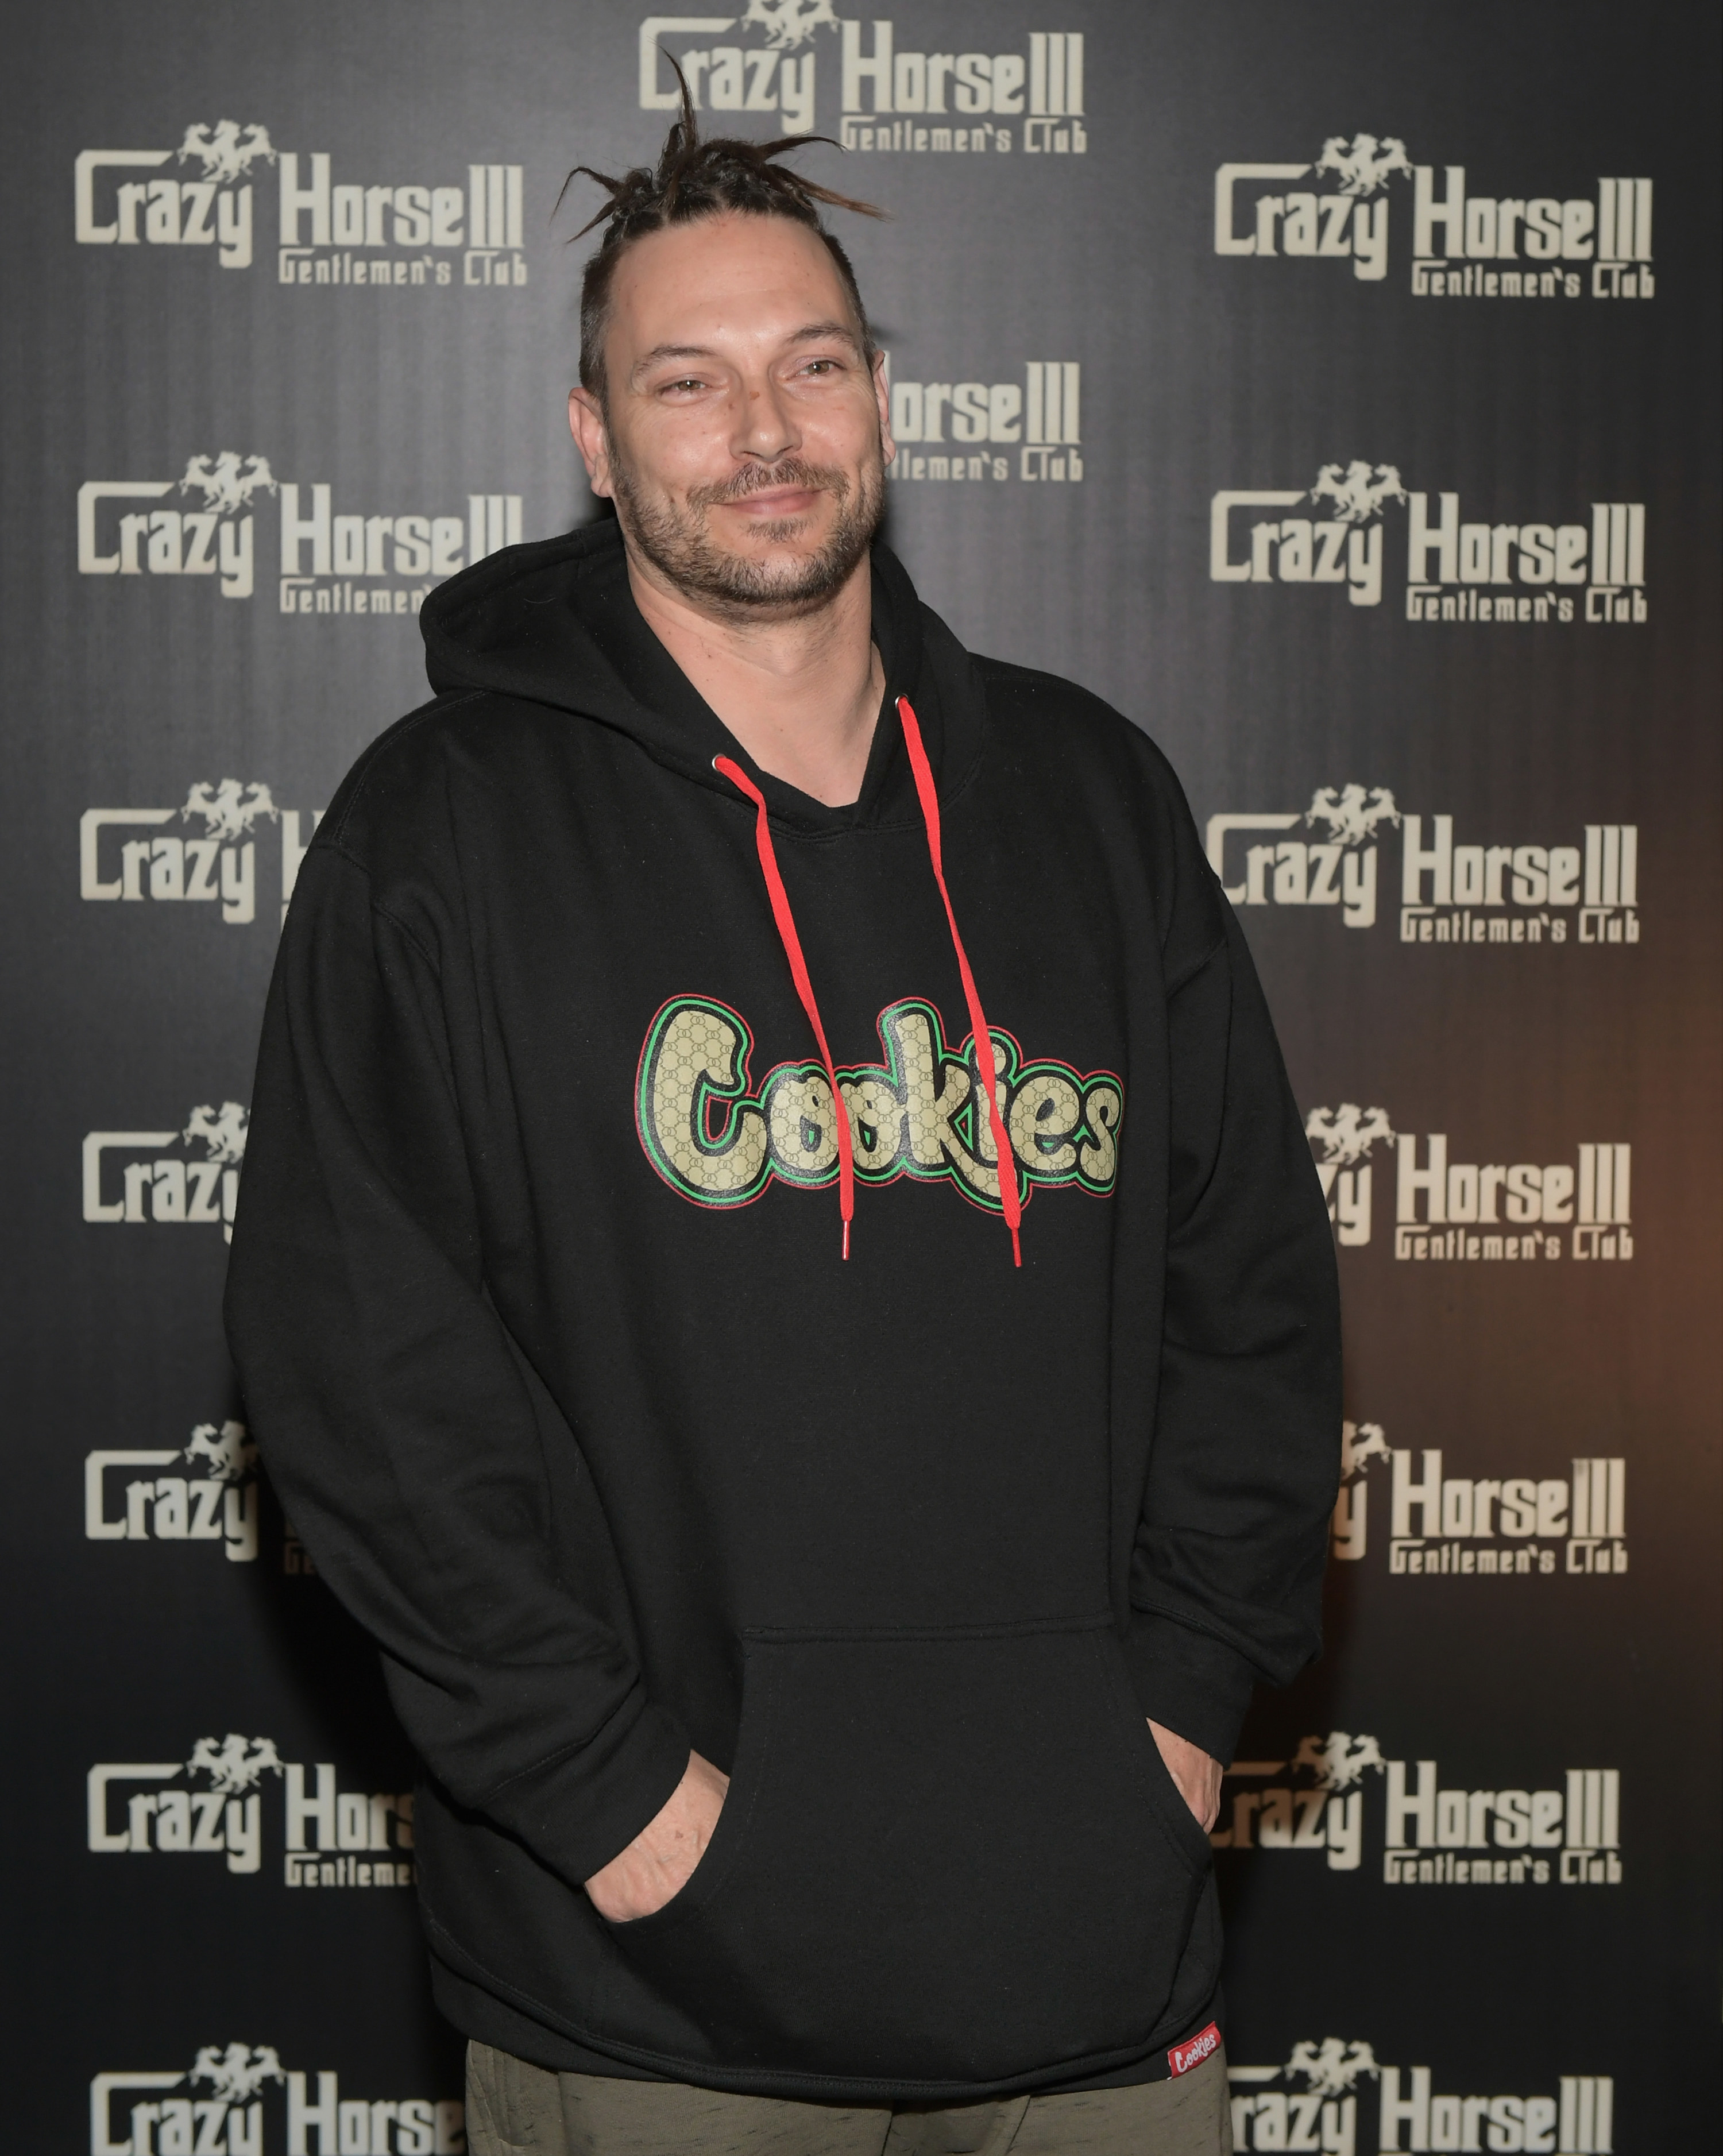 DJ Kevin Federline arrives at the Crazy Horse III Gentlemen&#x27;s Club to celebrate his birthday on March 24, 2018 in Las Vegas, Nevada